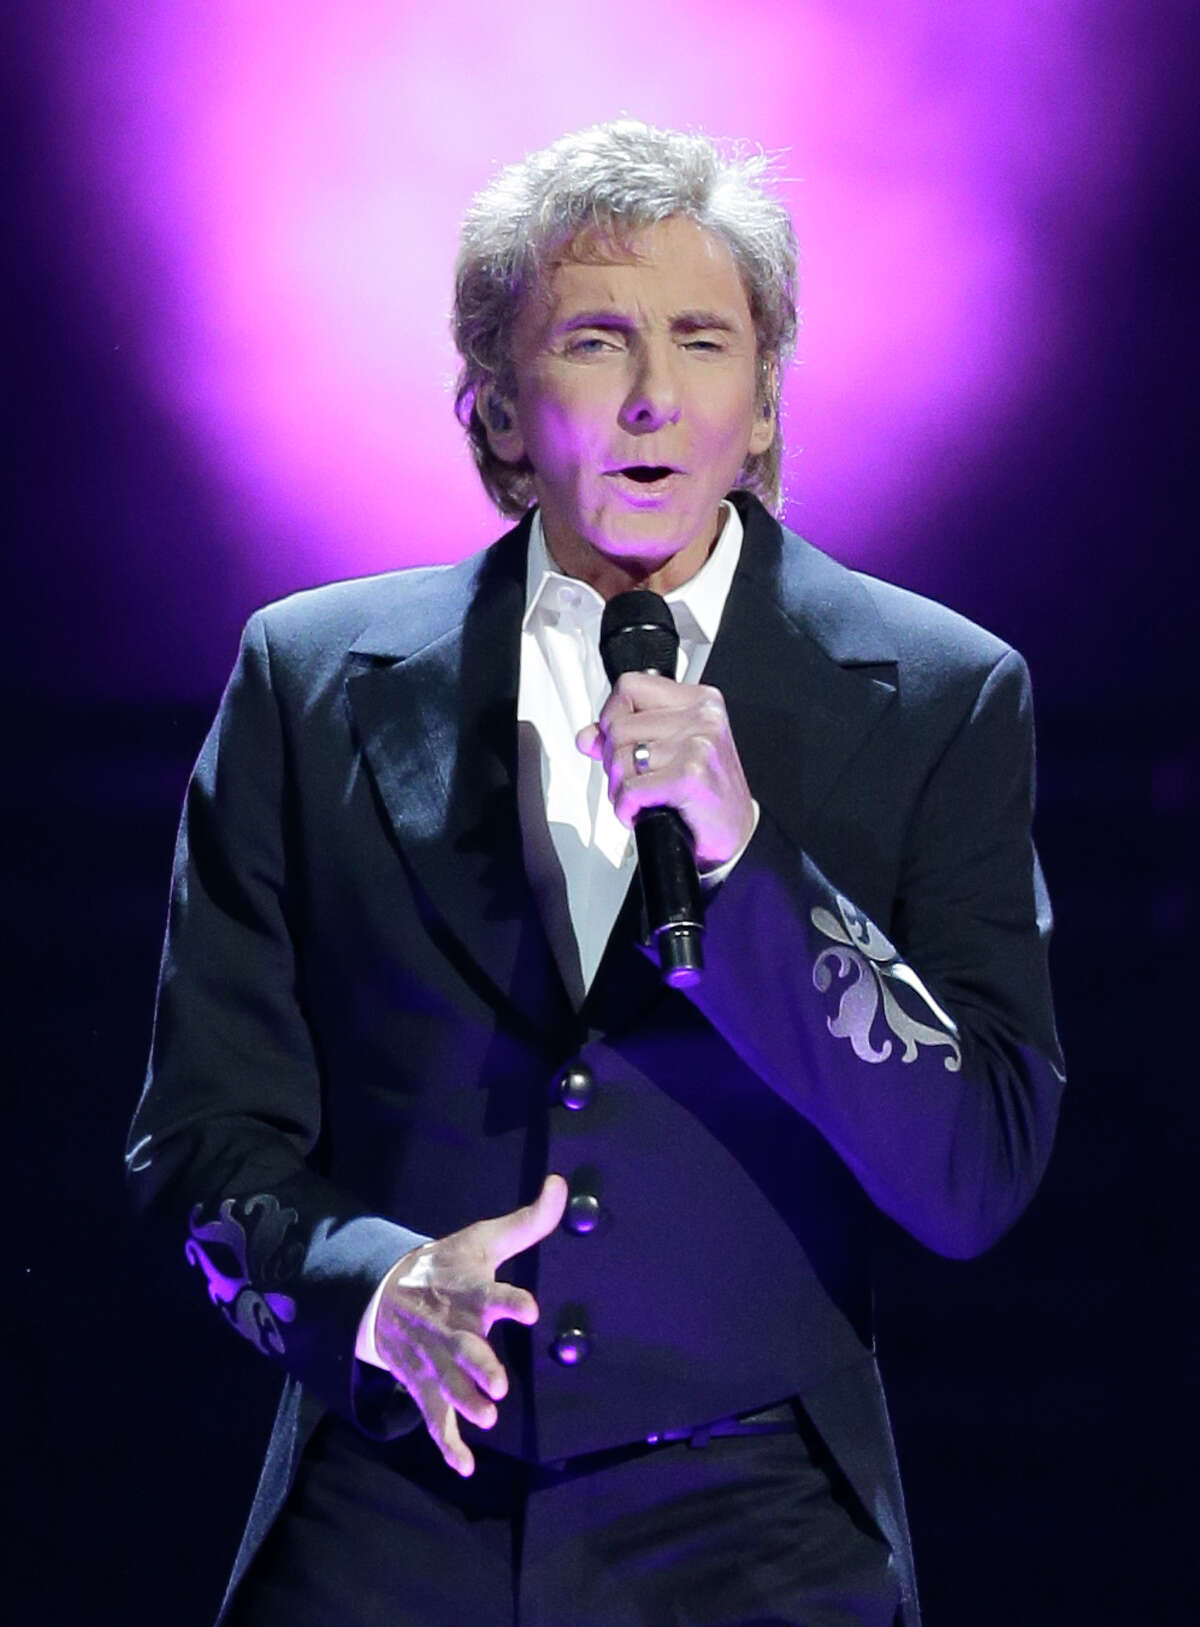 Barry Manilow is taking a bow, but his impact on music and culture will